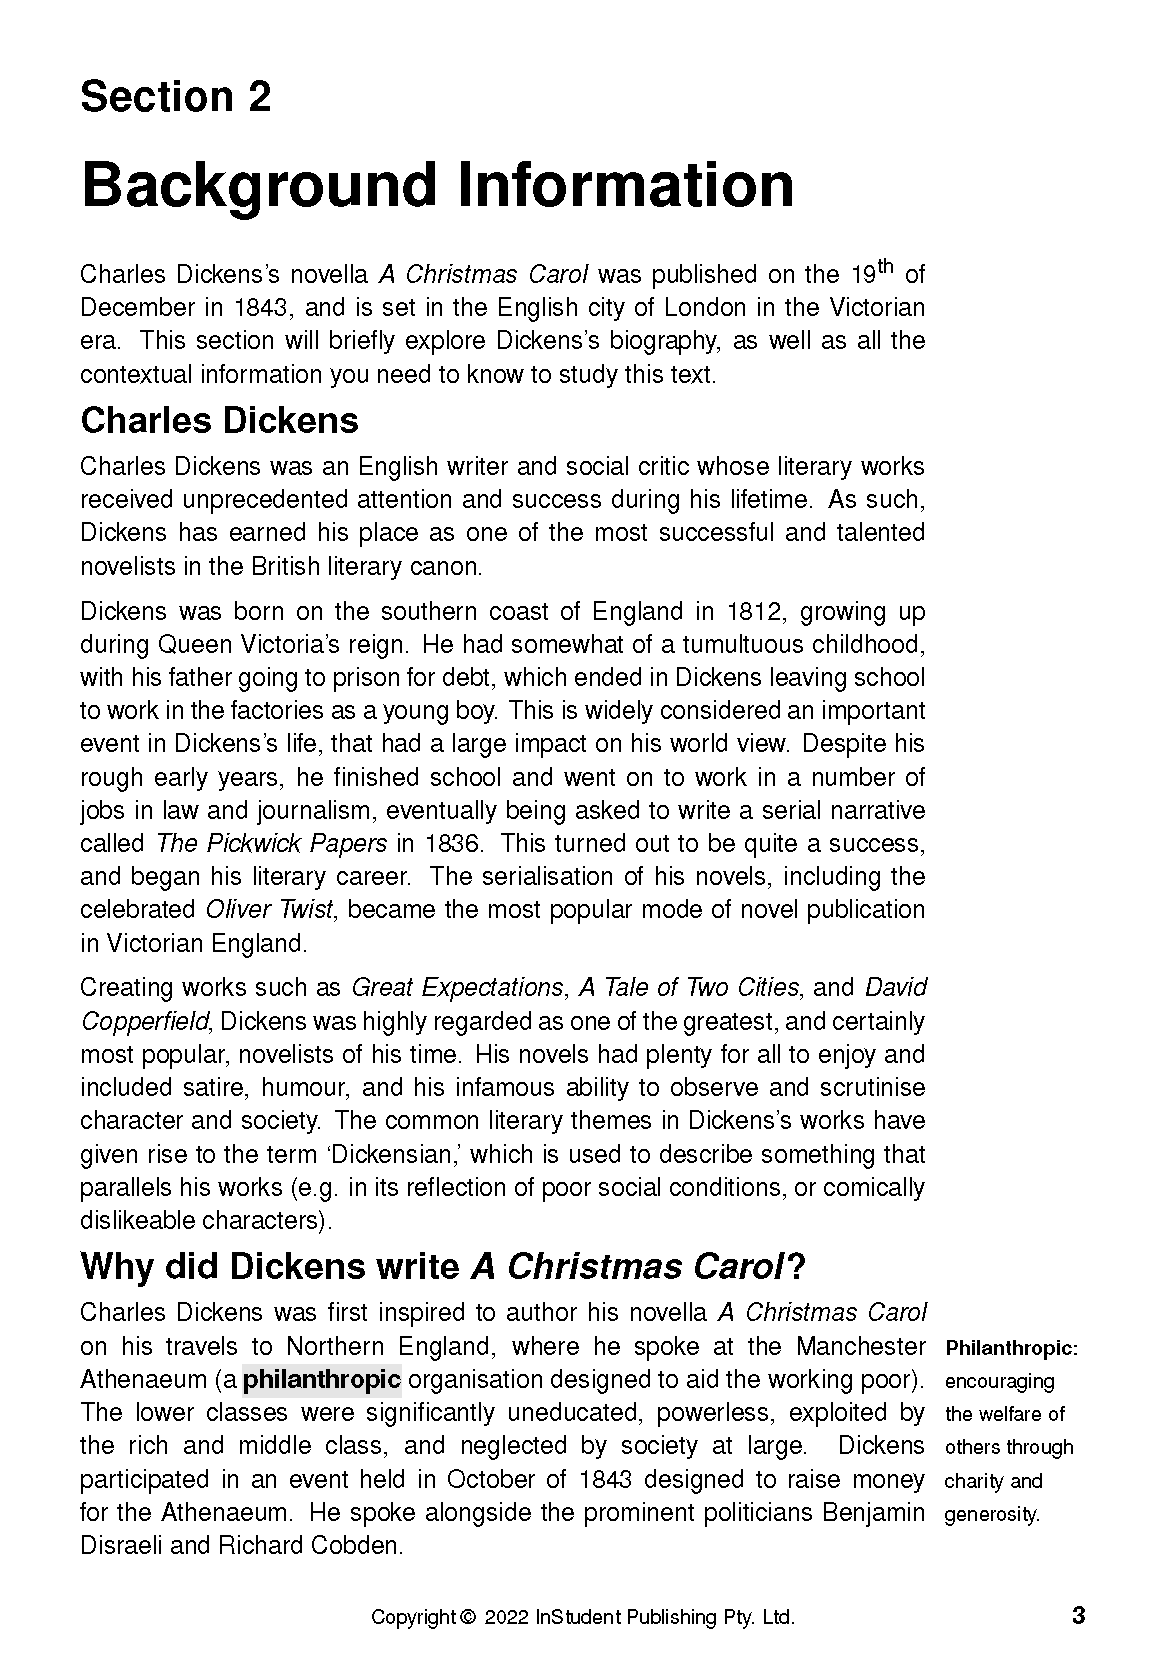 Text Guide: A Christmas Carol by Charles Dickens